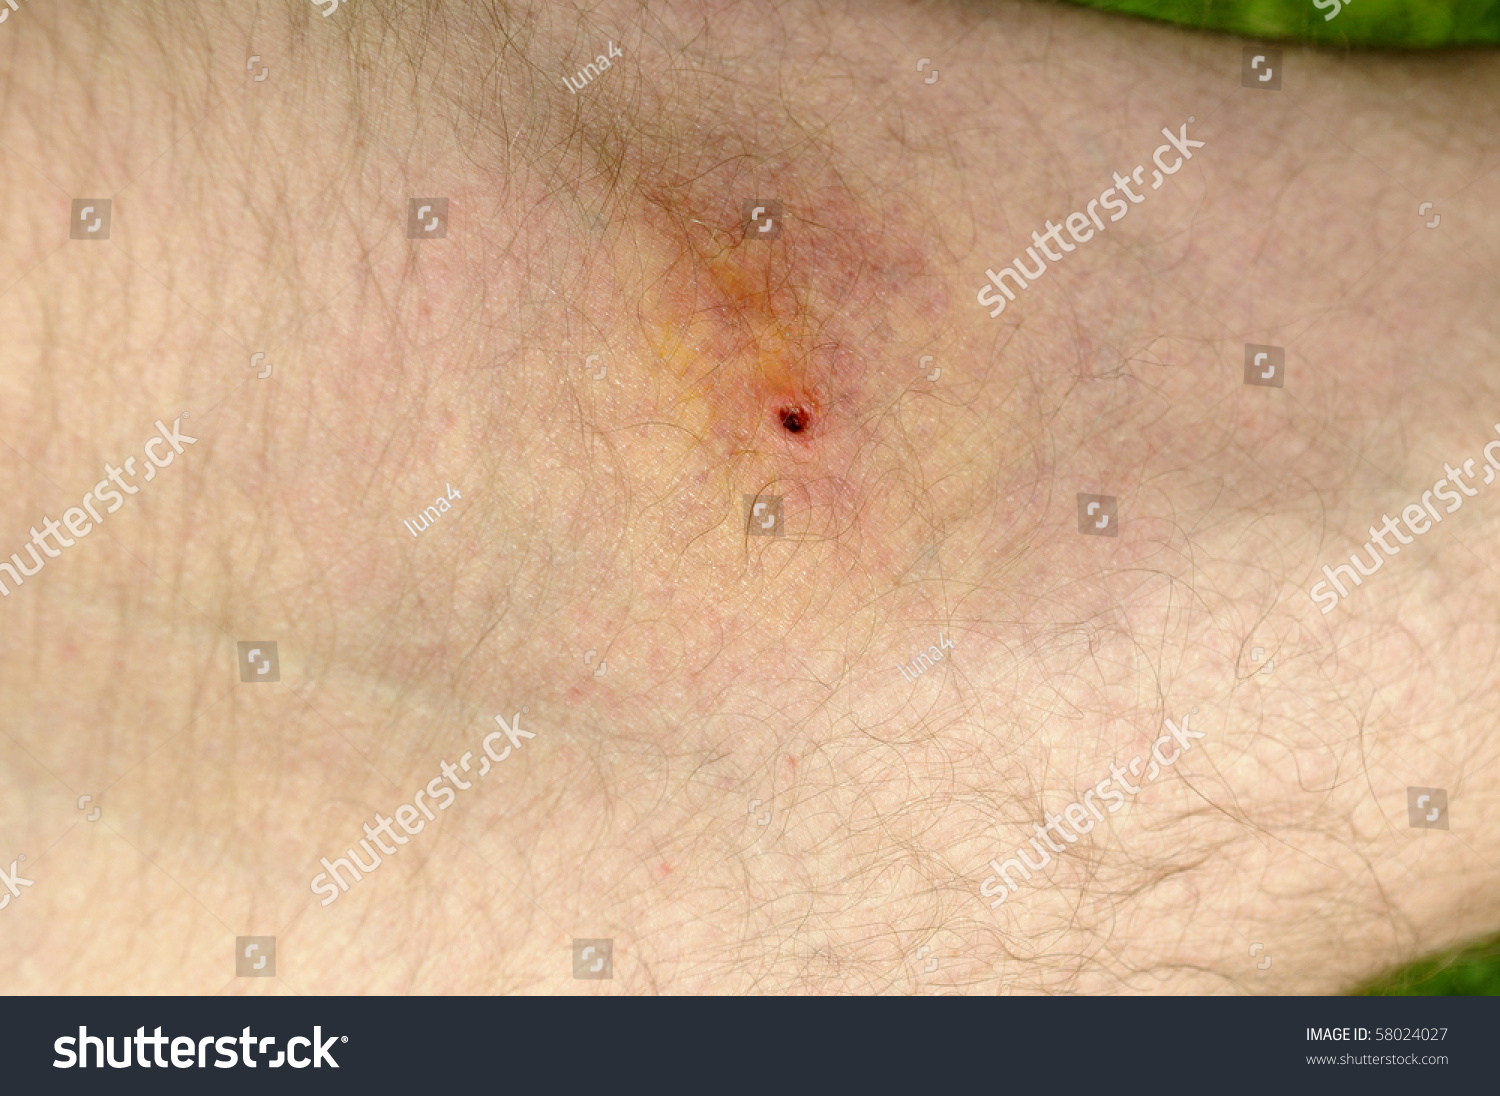 Infected Tick Bite On Thigh Stock Photo 58024027 Shutterstock